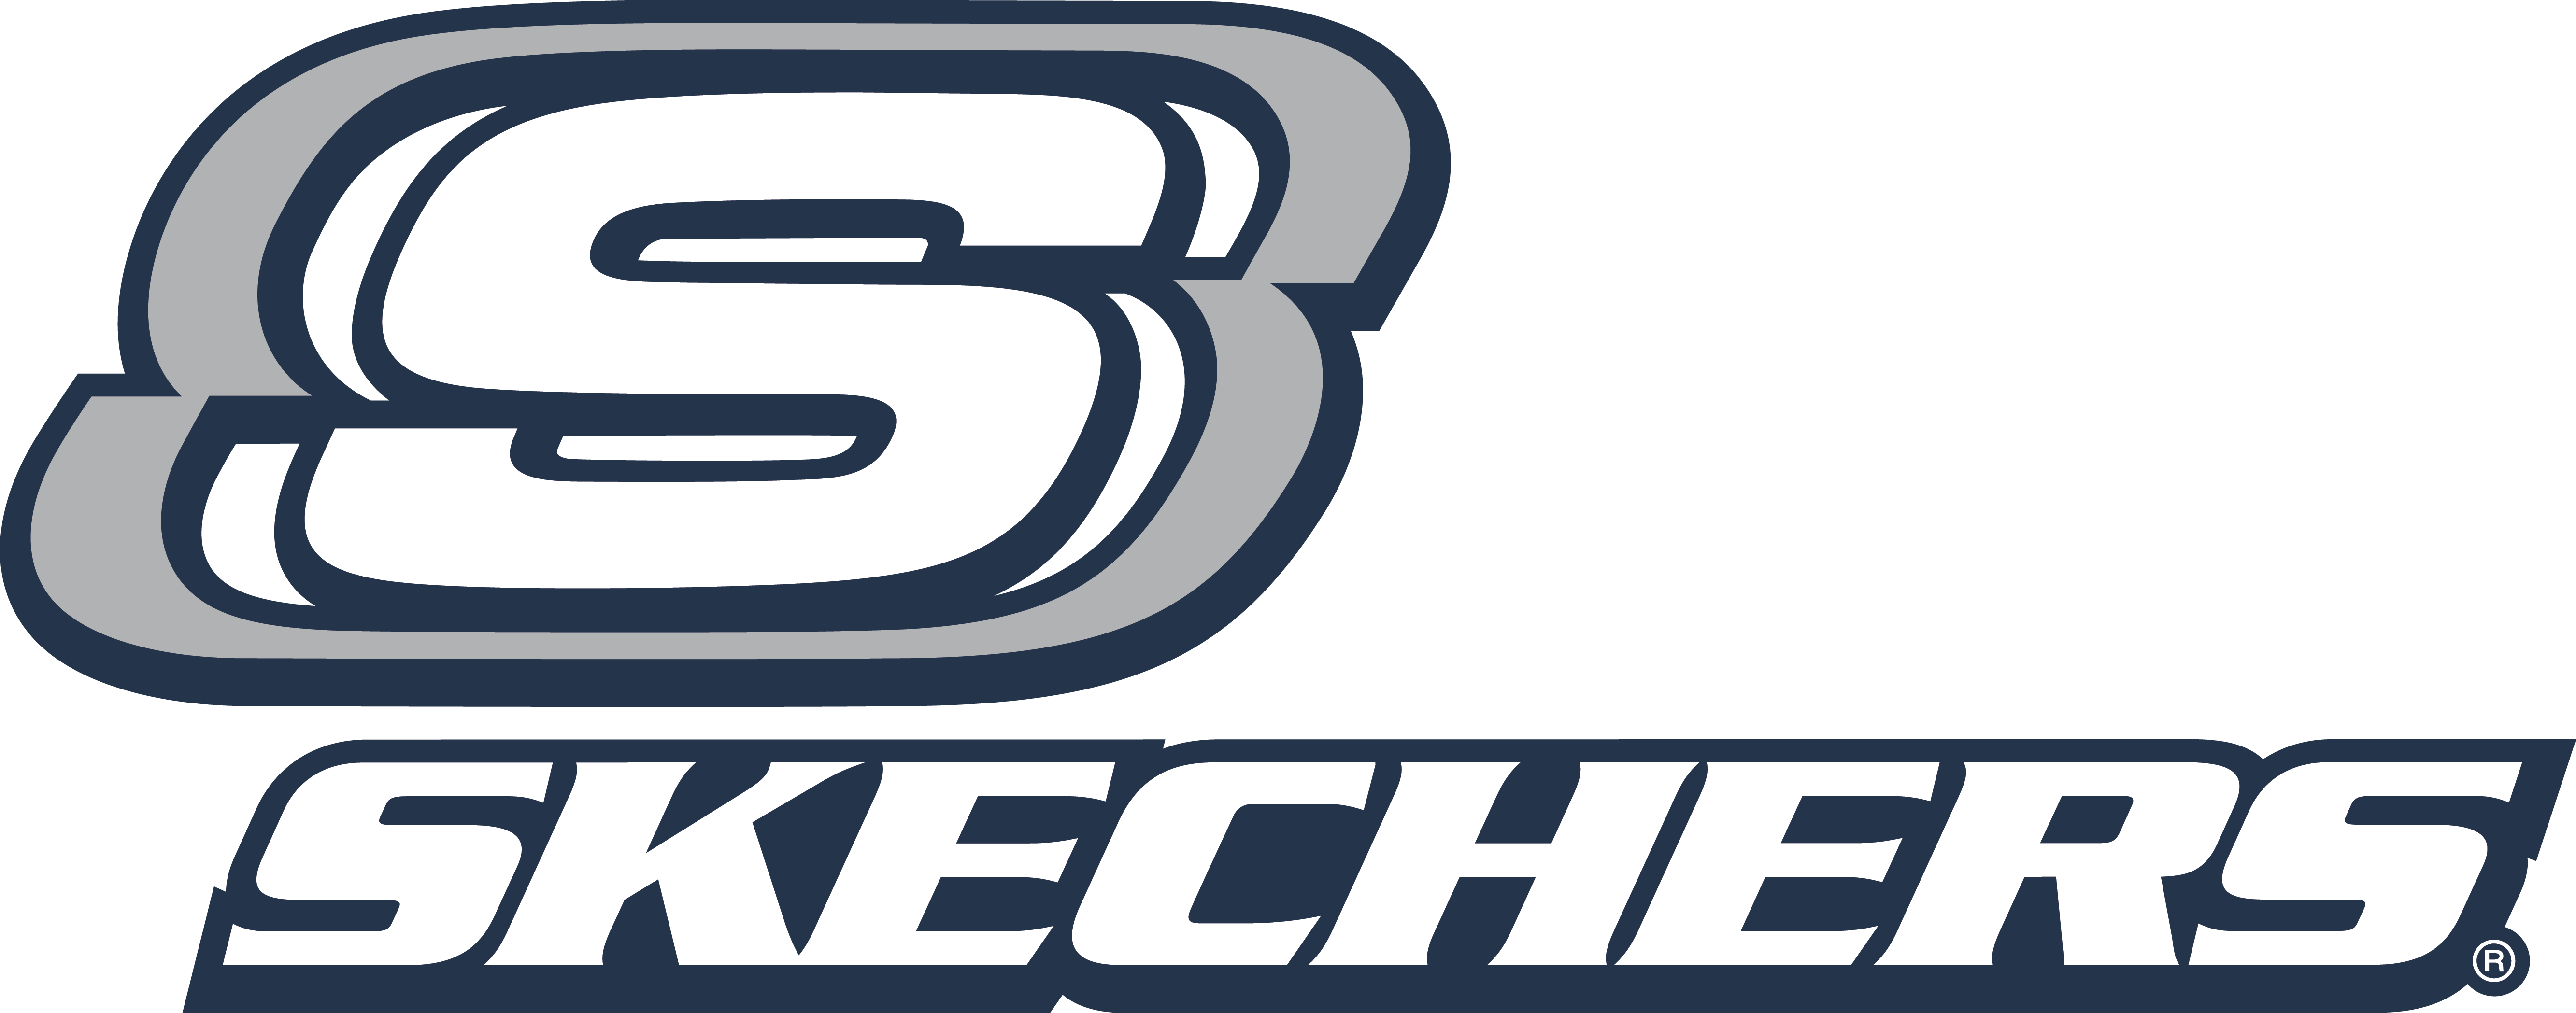 Customers Reviews about Skechers